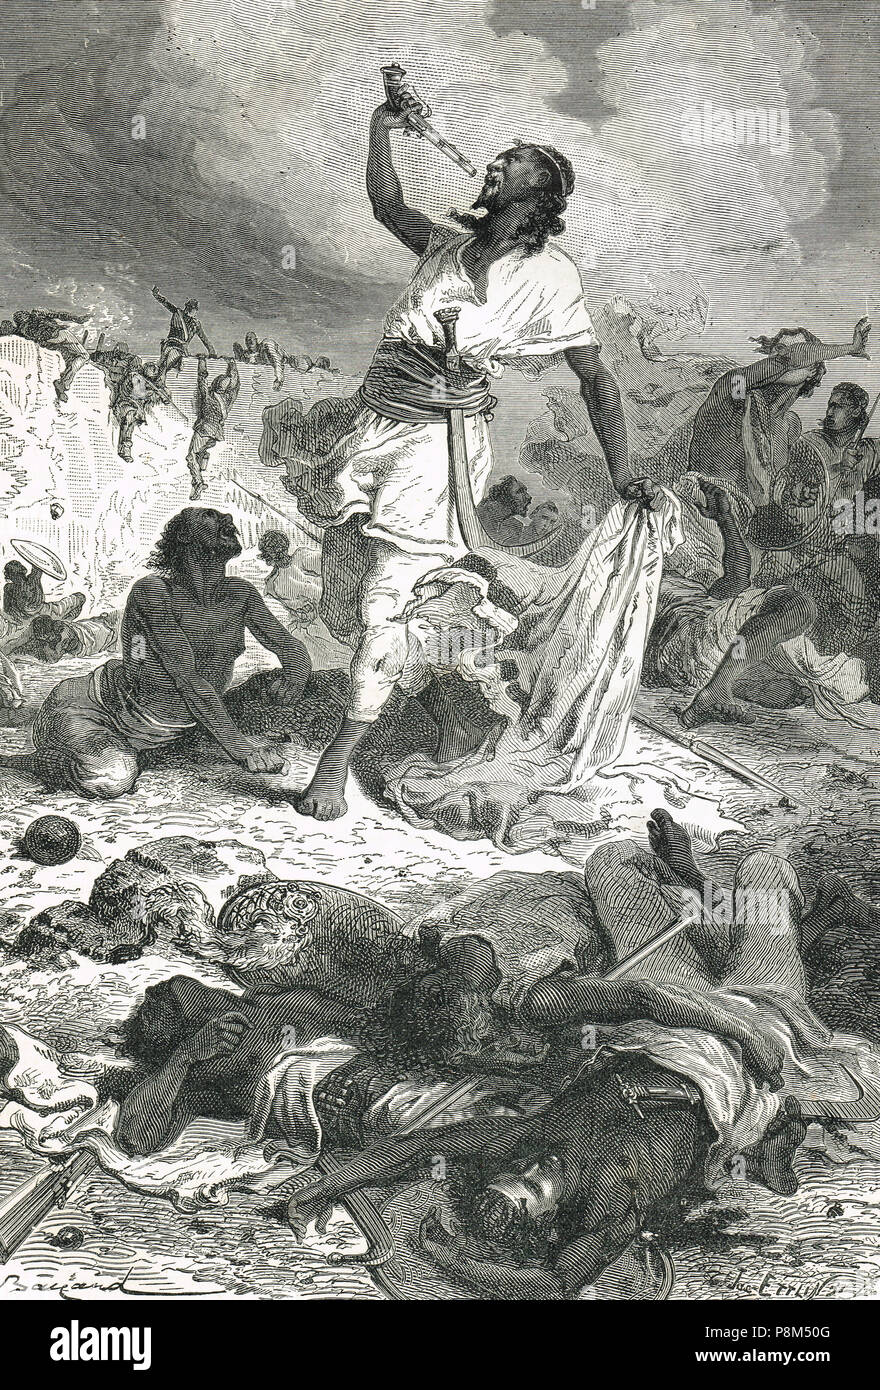 Death of Abyssinian Emperor Theodore II, Tewodros II, committing suicide on Easter Monday, April 13 1868, as the British army stormed Magdalla, British Expedition to Abyssinia, 1867-1868, shooting himself with a pistol gifted to him by Queen Victoria Stock Photo